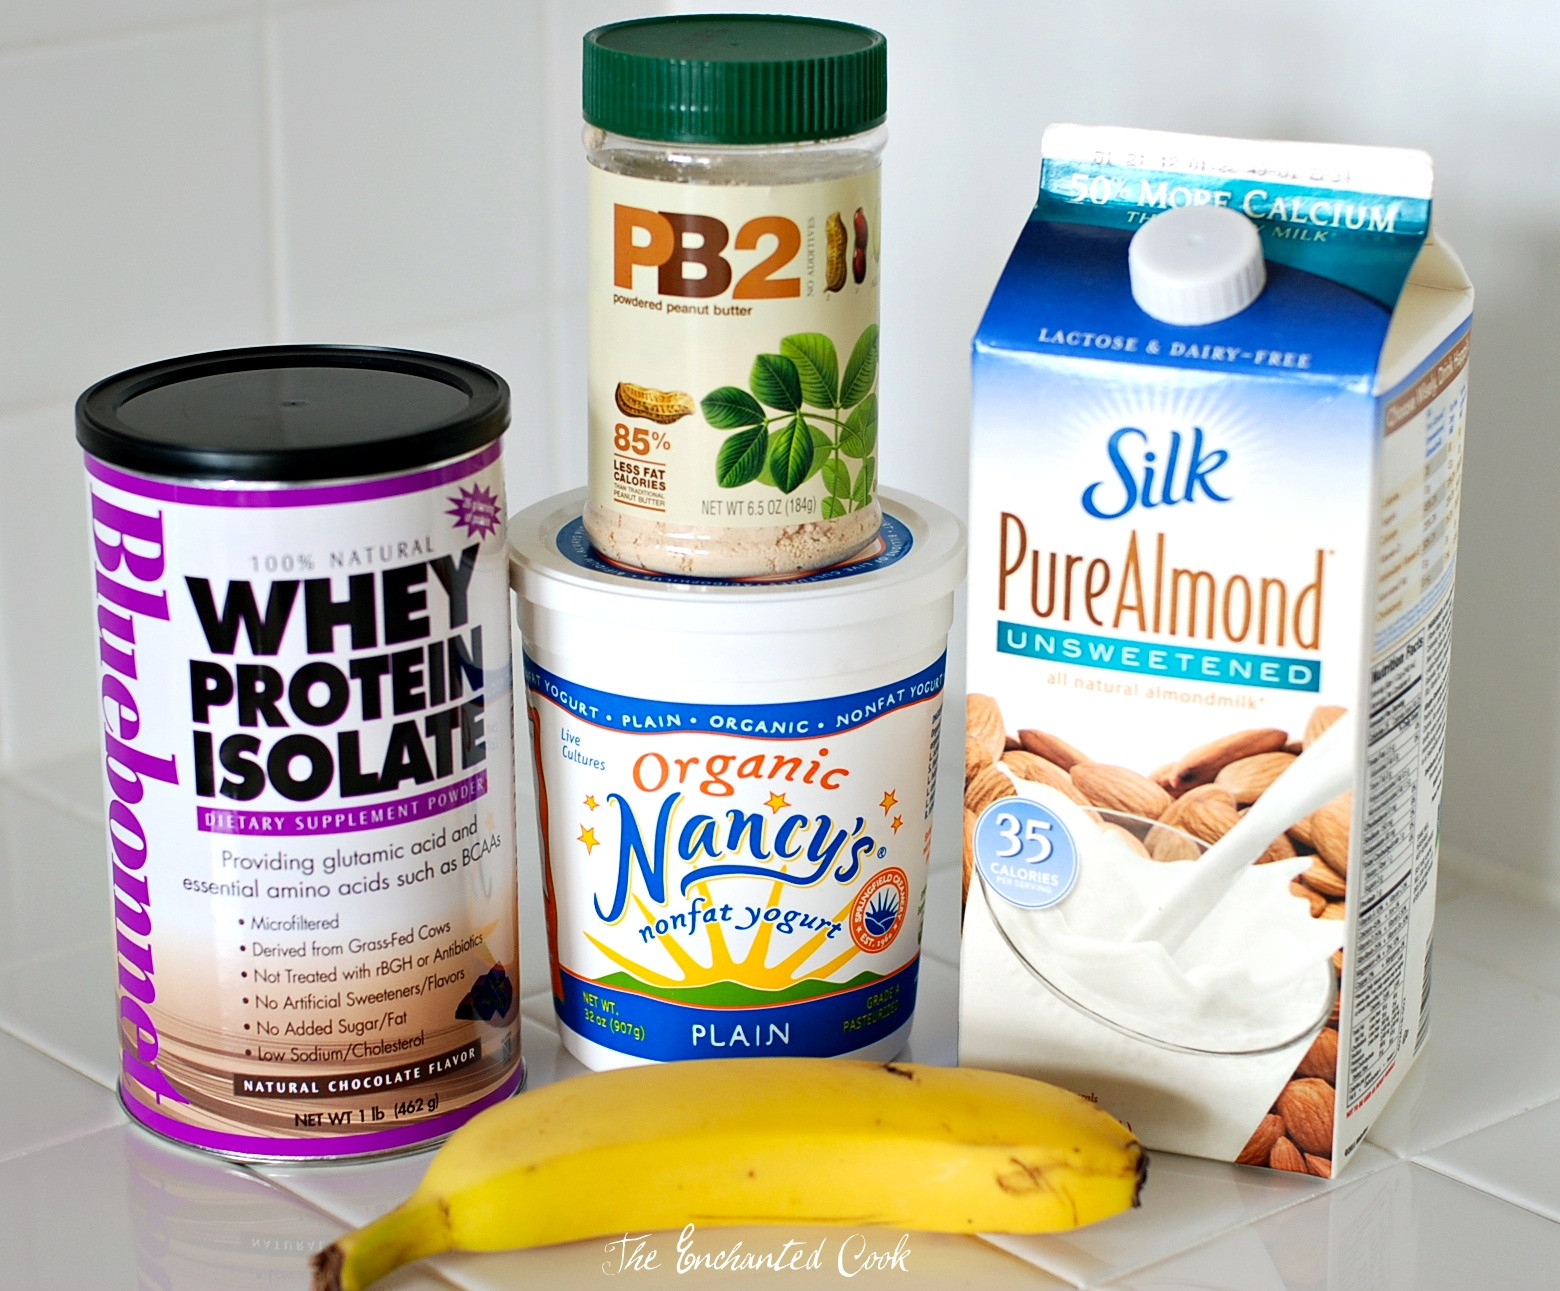 Low Calorie Protein Smoothies
 The Enchanted Cook Chocolate PB and Banana Smoothie